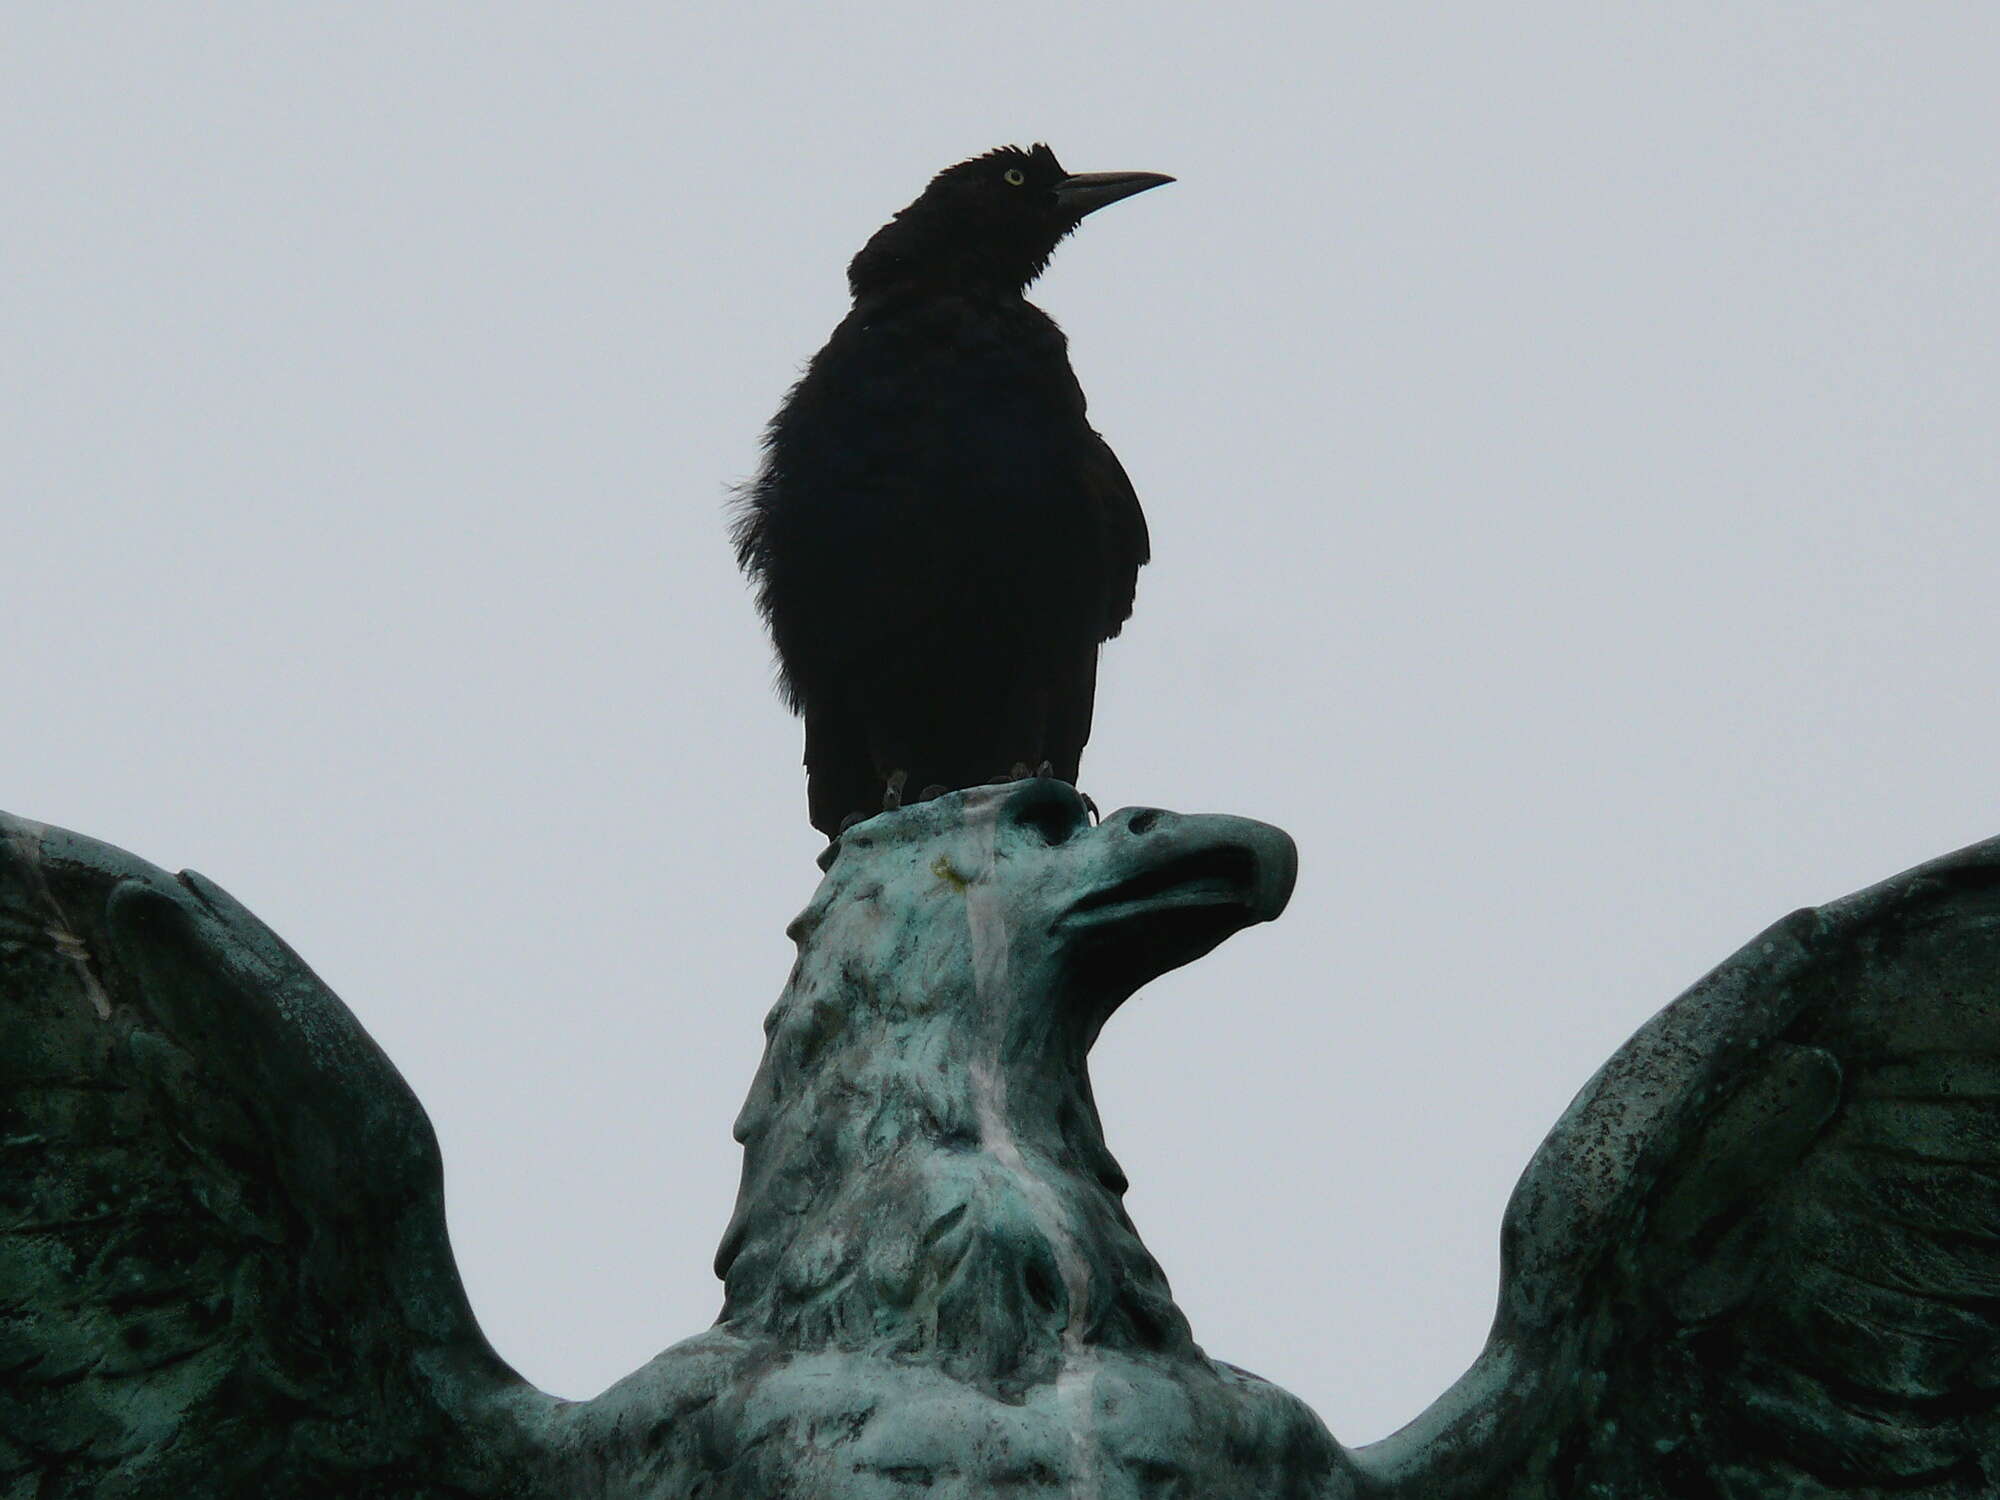 Image of Boat-tailed Grackle